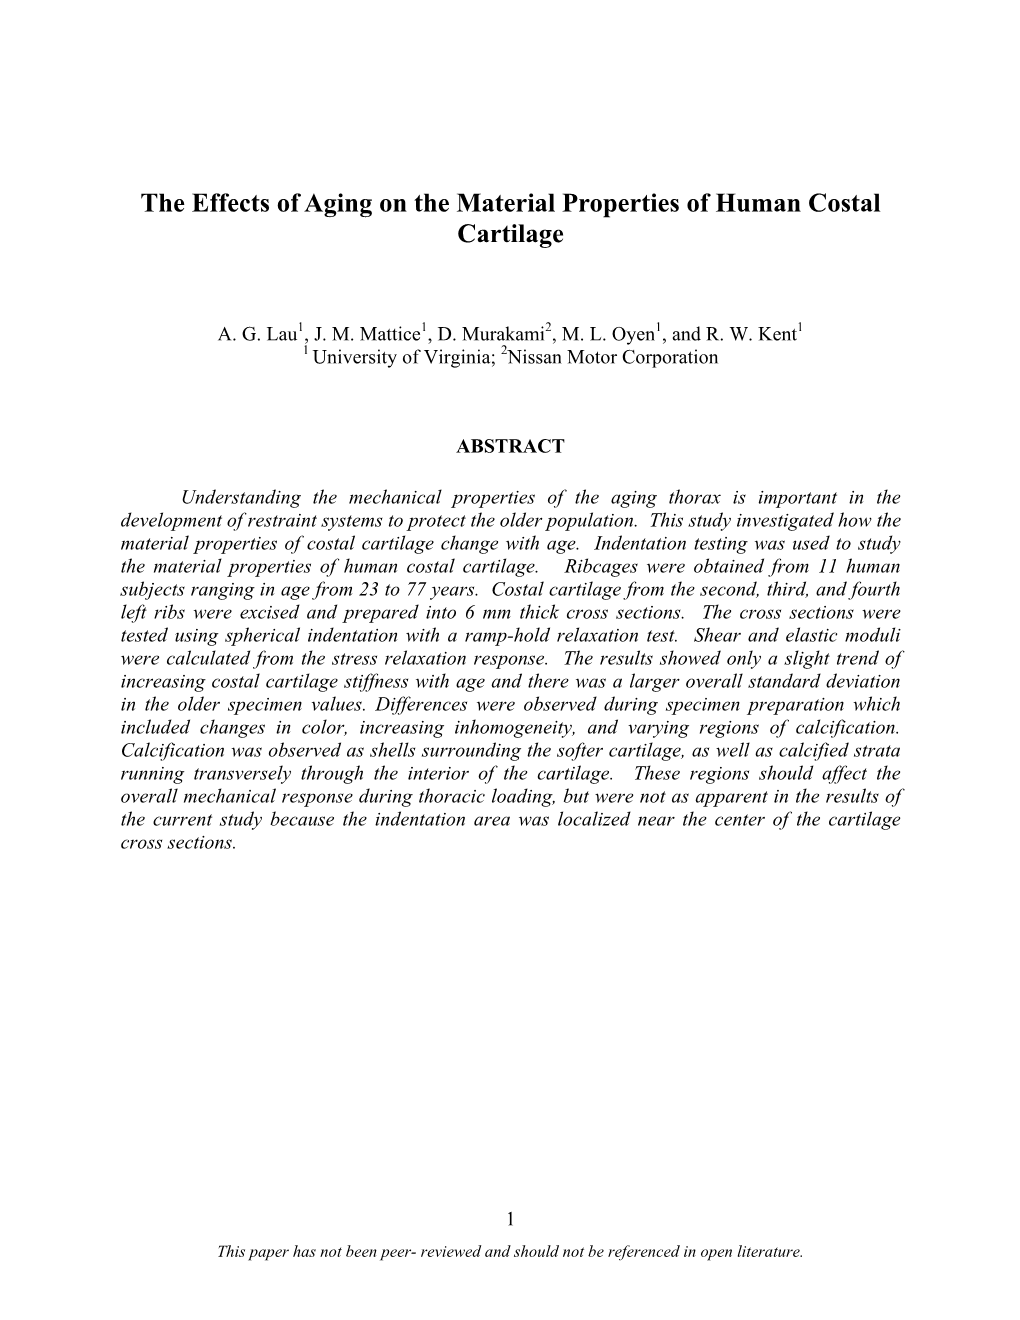 The Effects of Aging on the Material Properties of Human Costal Cartilage